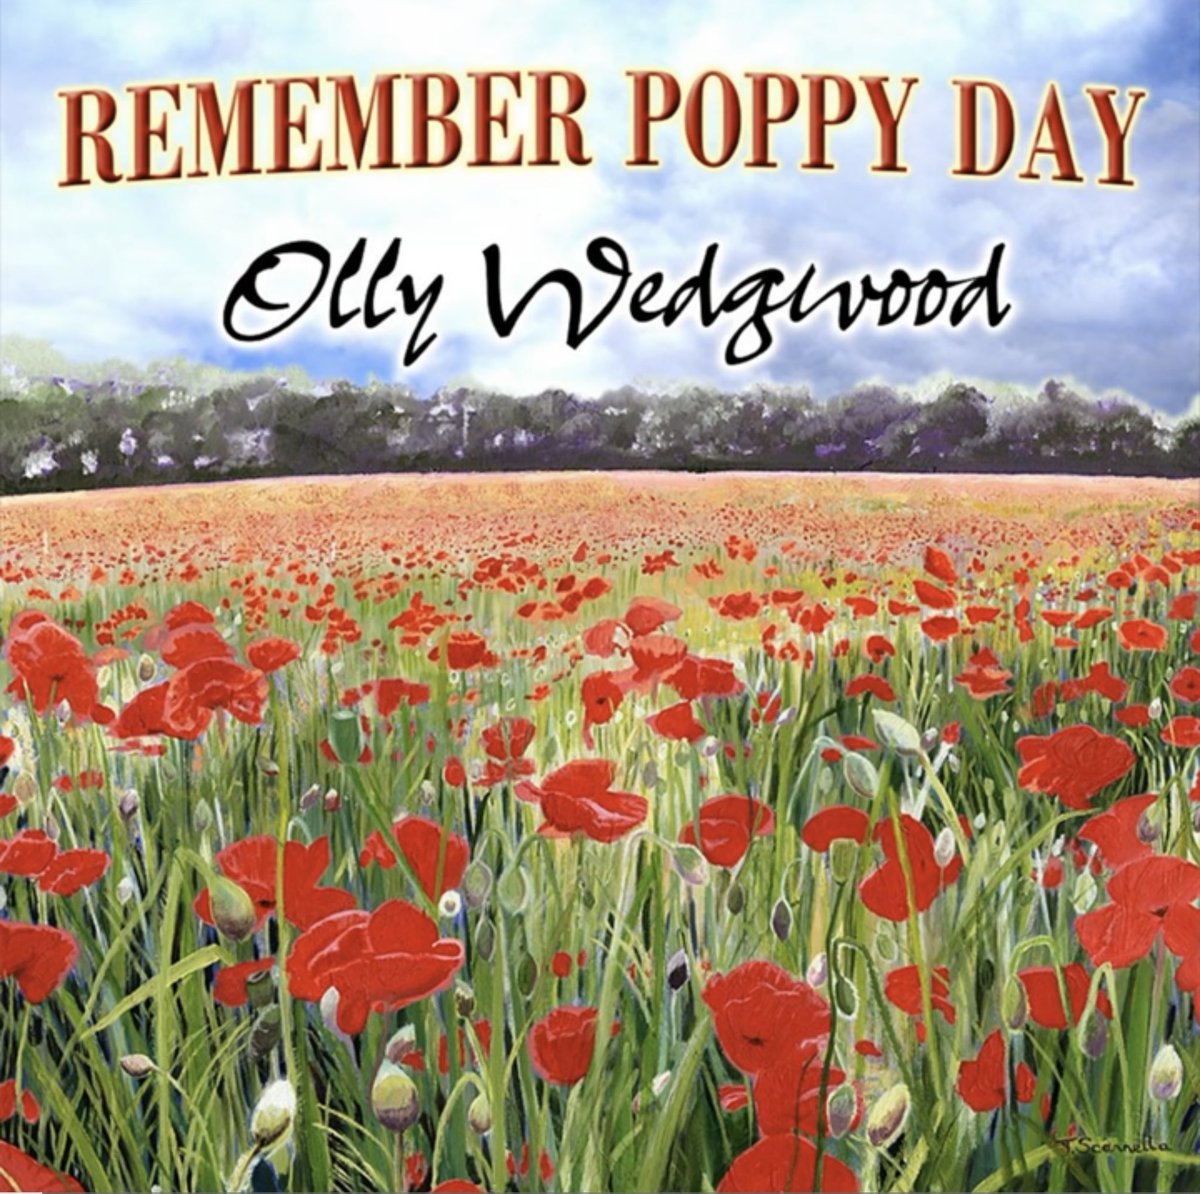 For Remembrance Sunday Remember Poppy Day - by Olly Wedgwood from Addlestone youtu.be/D2GgJ6-kjCY?si… #RemembanceDay #Remembrance #Remembrance2023 #RemembranceDay2023 #RemembranceSunday #Poppies #poppy